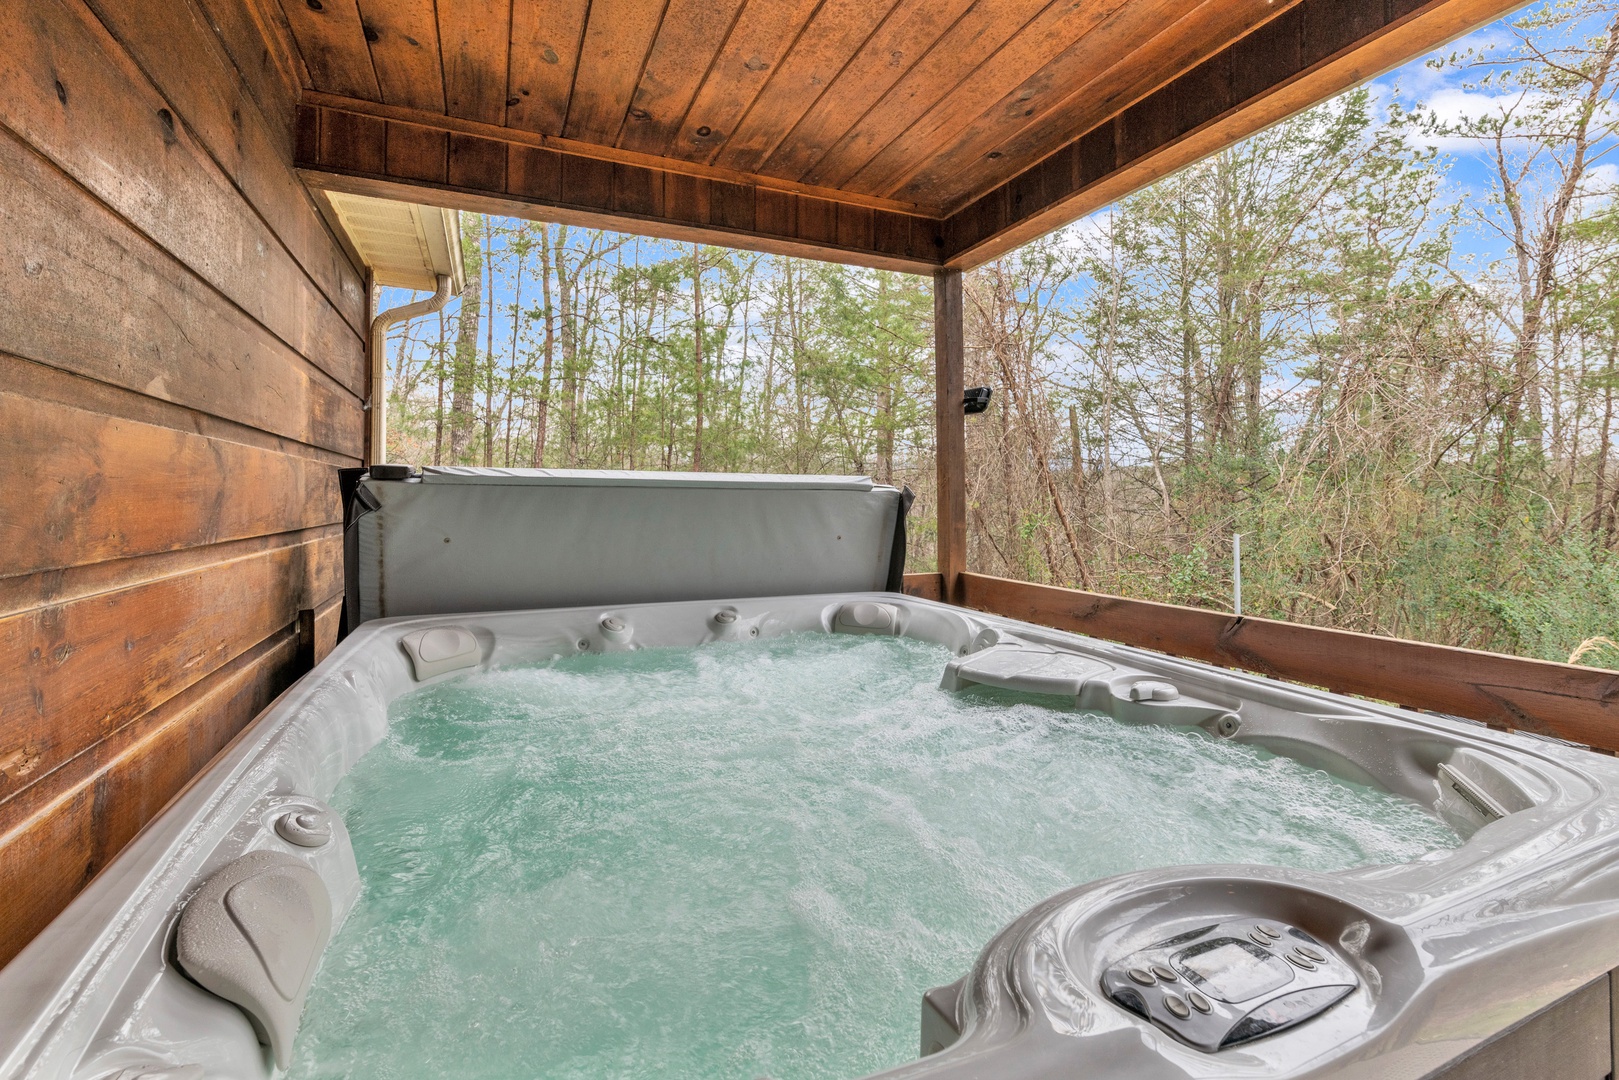 Soak your cares away with tranquil nature views in the private hot tub